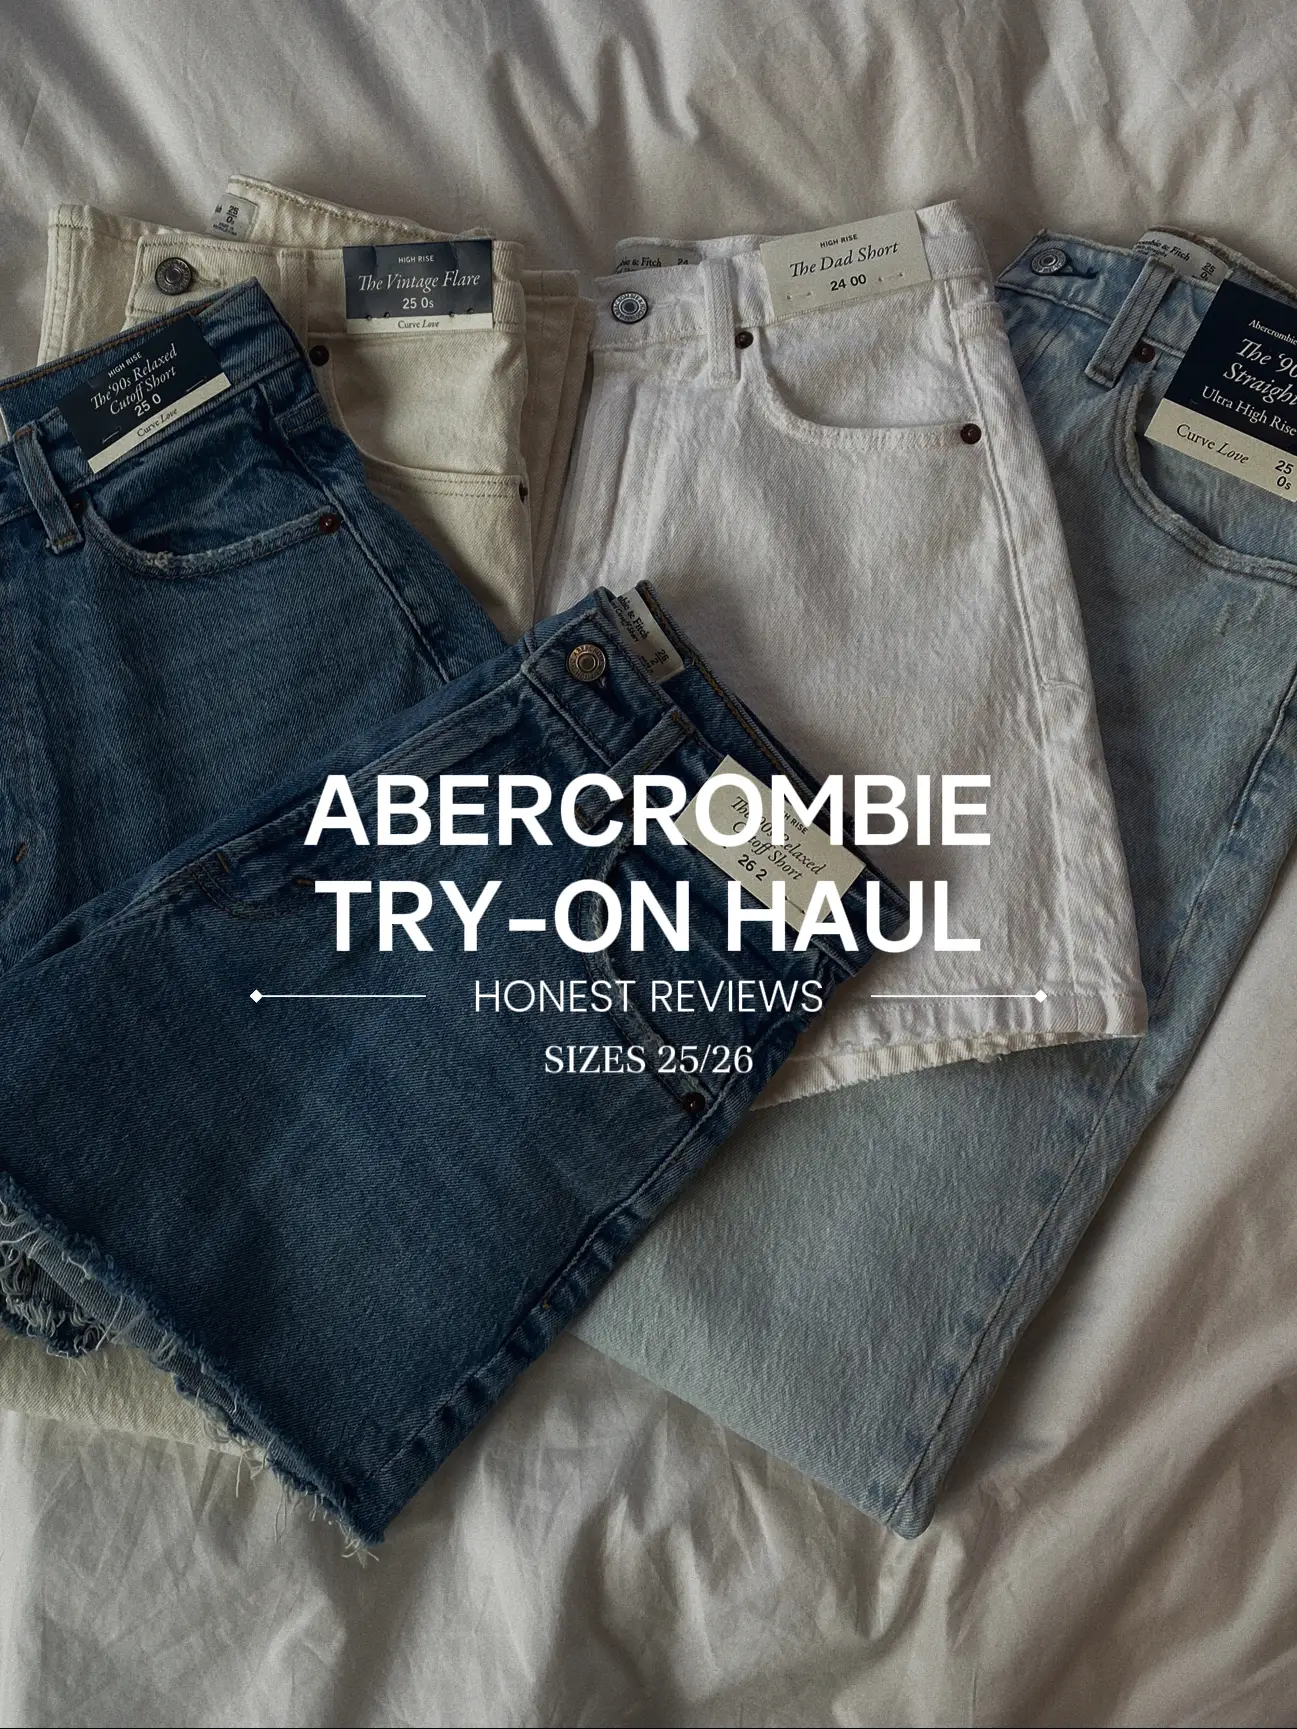 is abercrombie & fitch denim worth it?!? TRY-ON